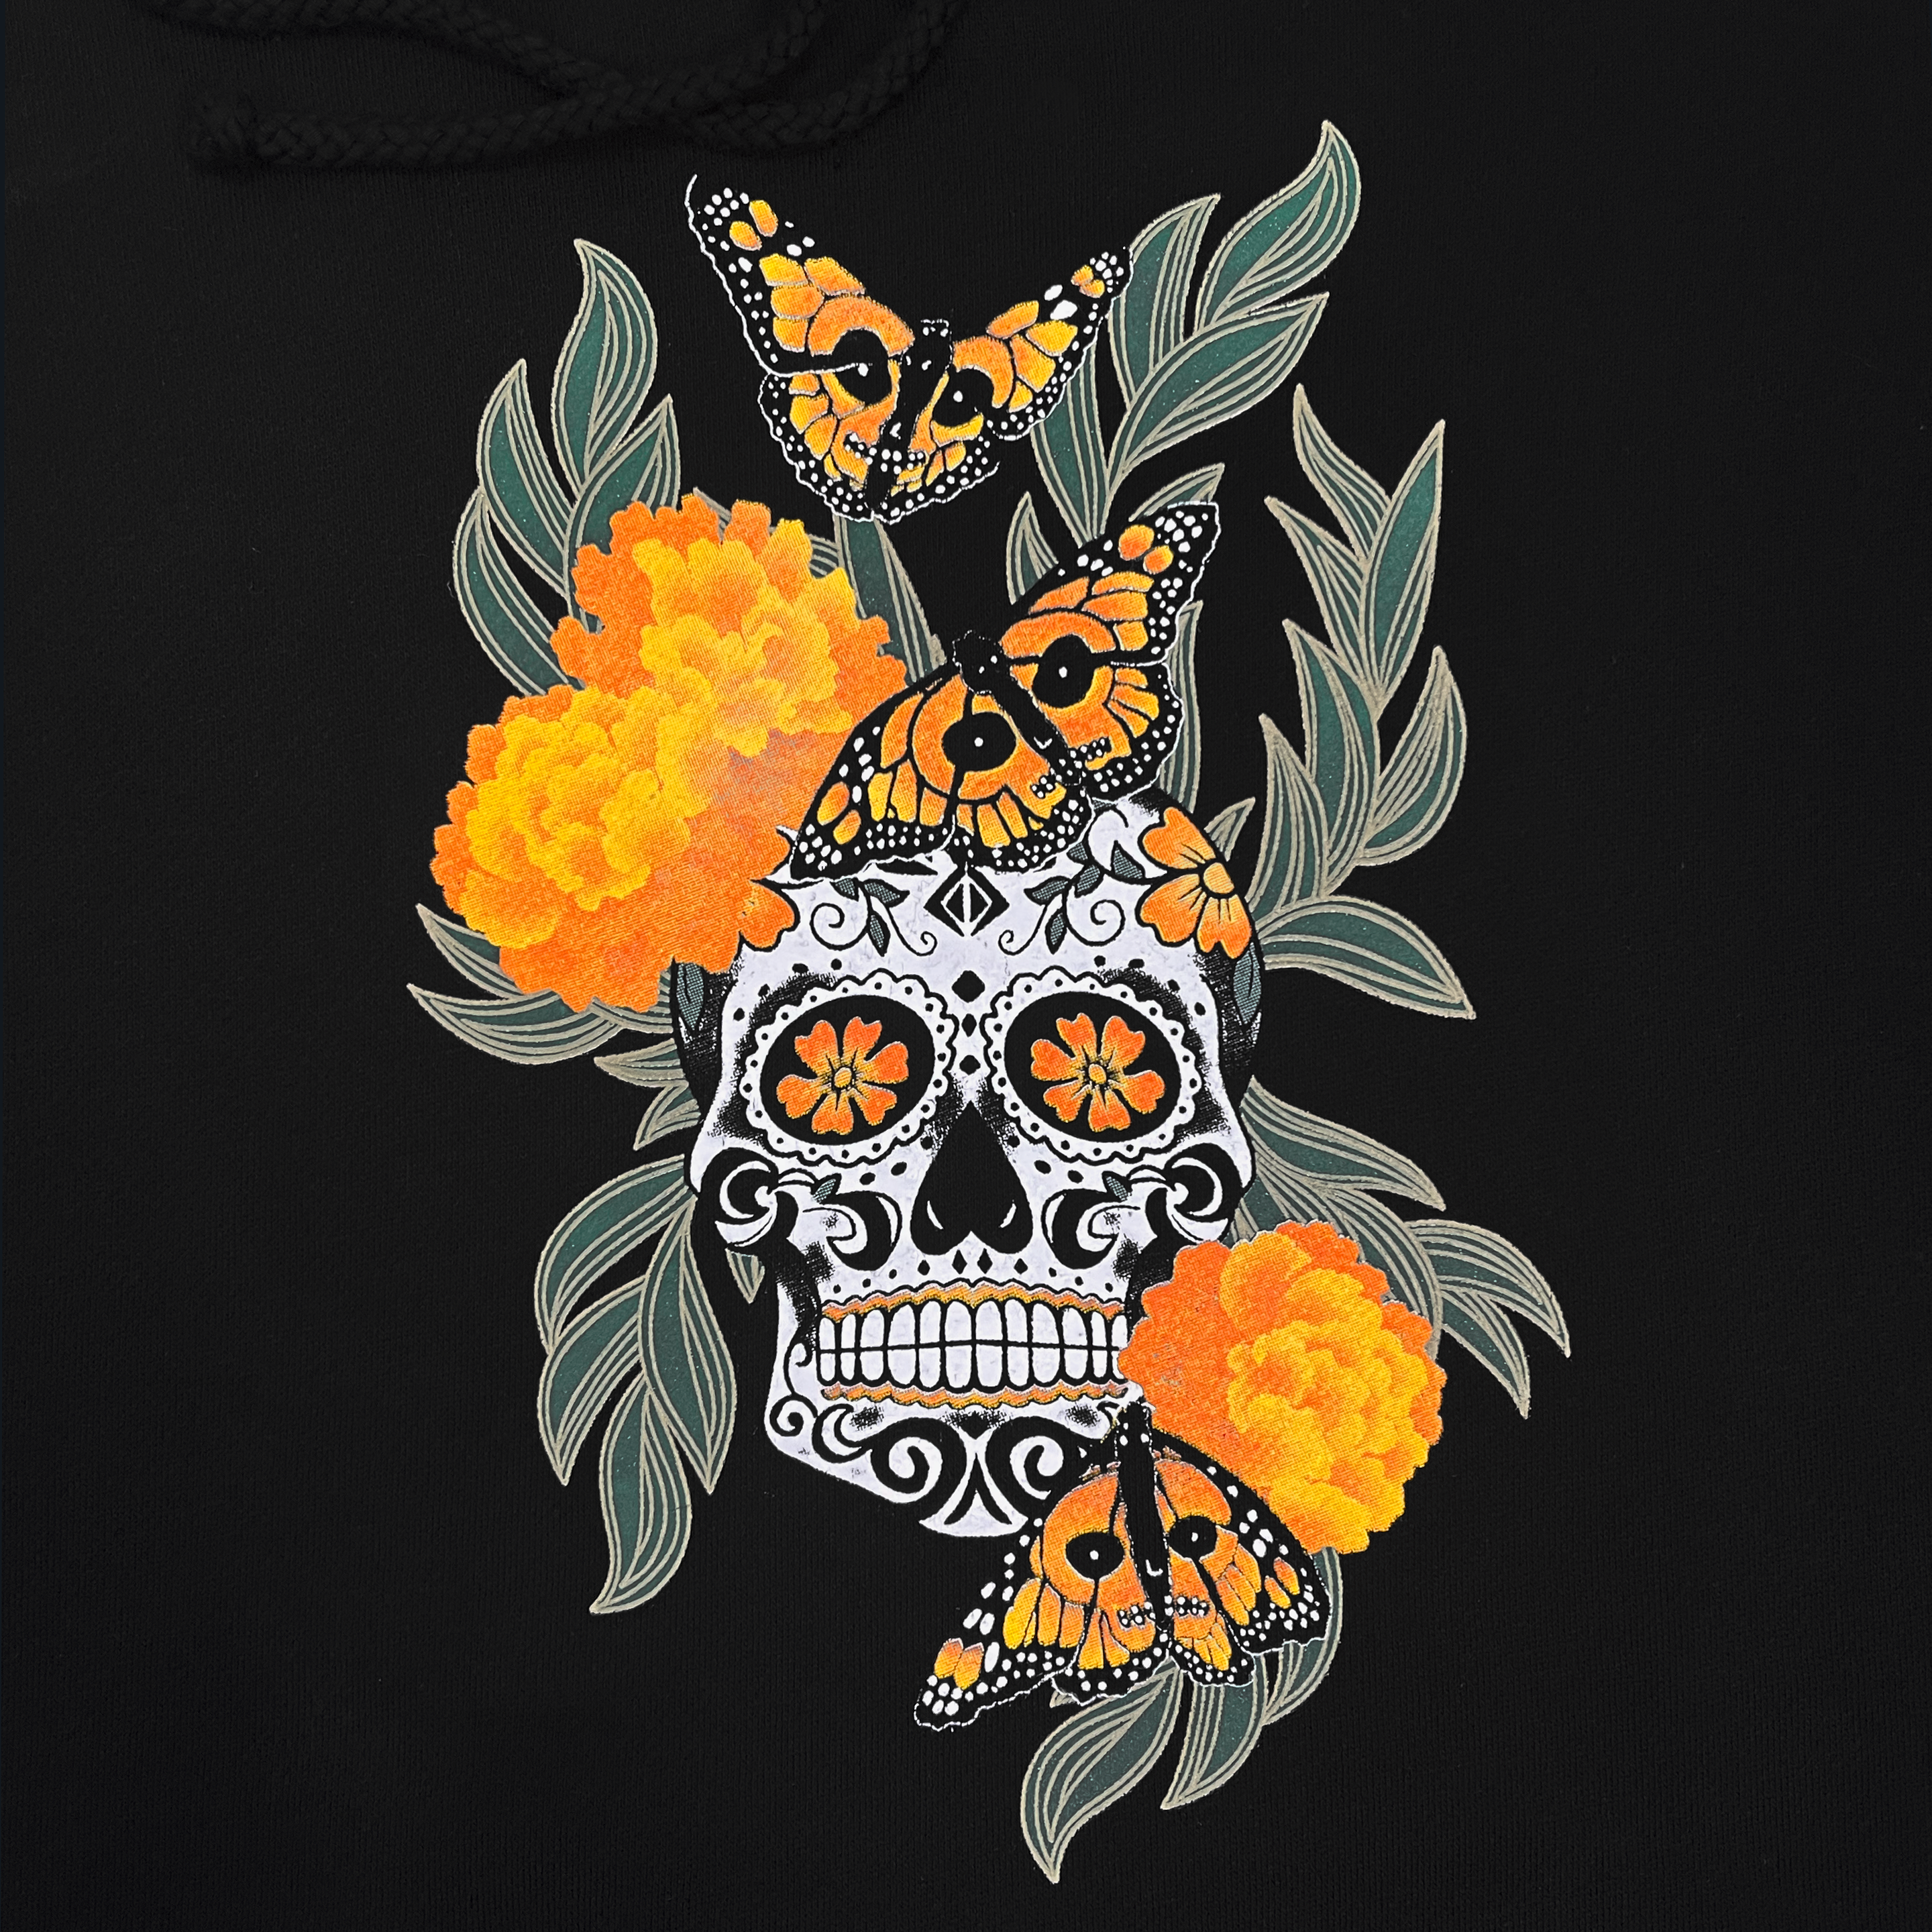 Detail image of sugar skull surrounded by 3 flowers and 3 butterflies. 